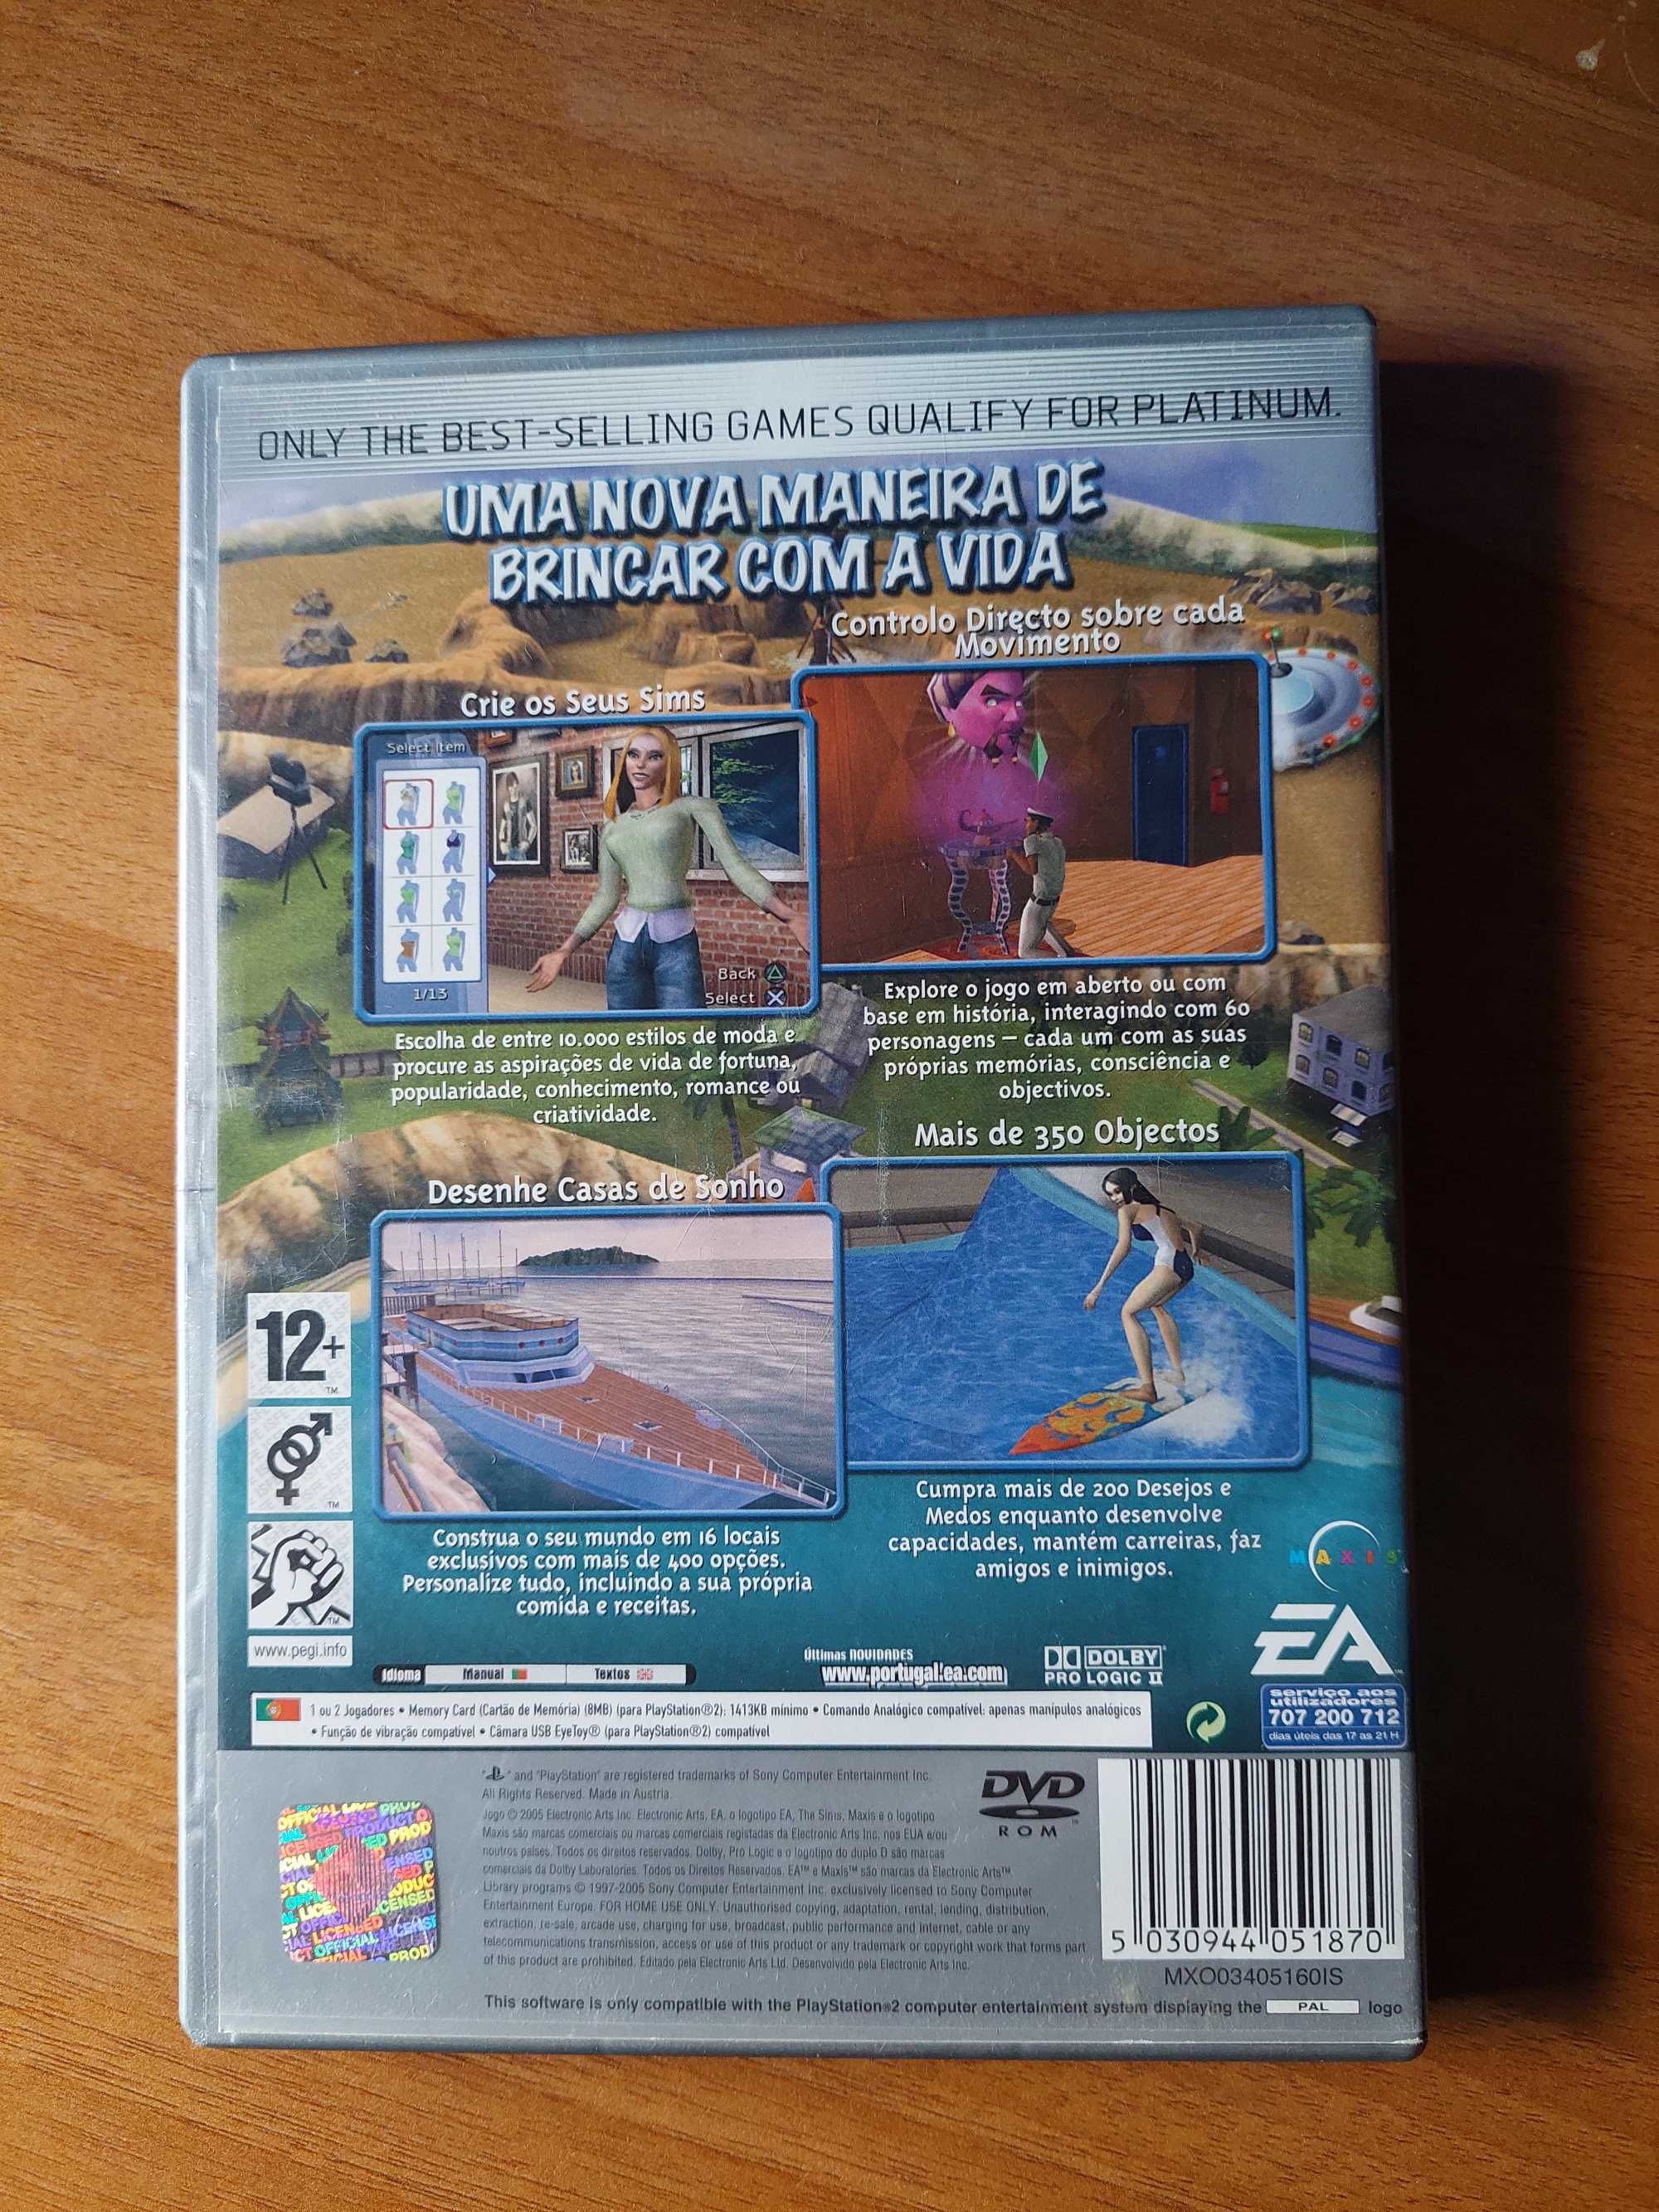 Jogo "The Sims 2" Playstation2